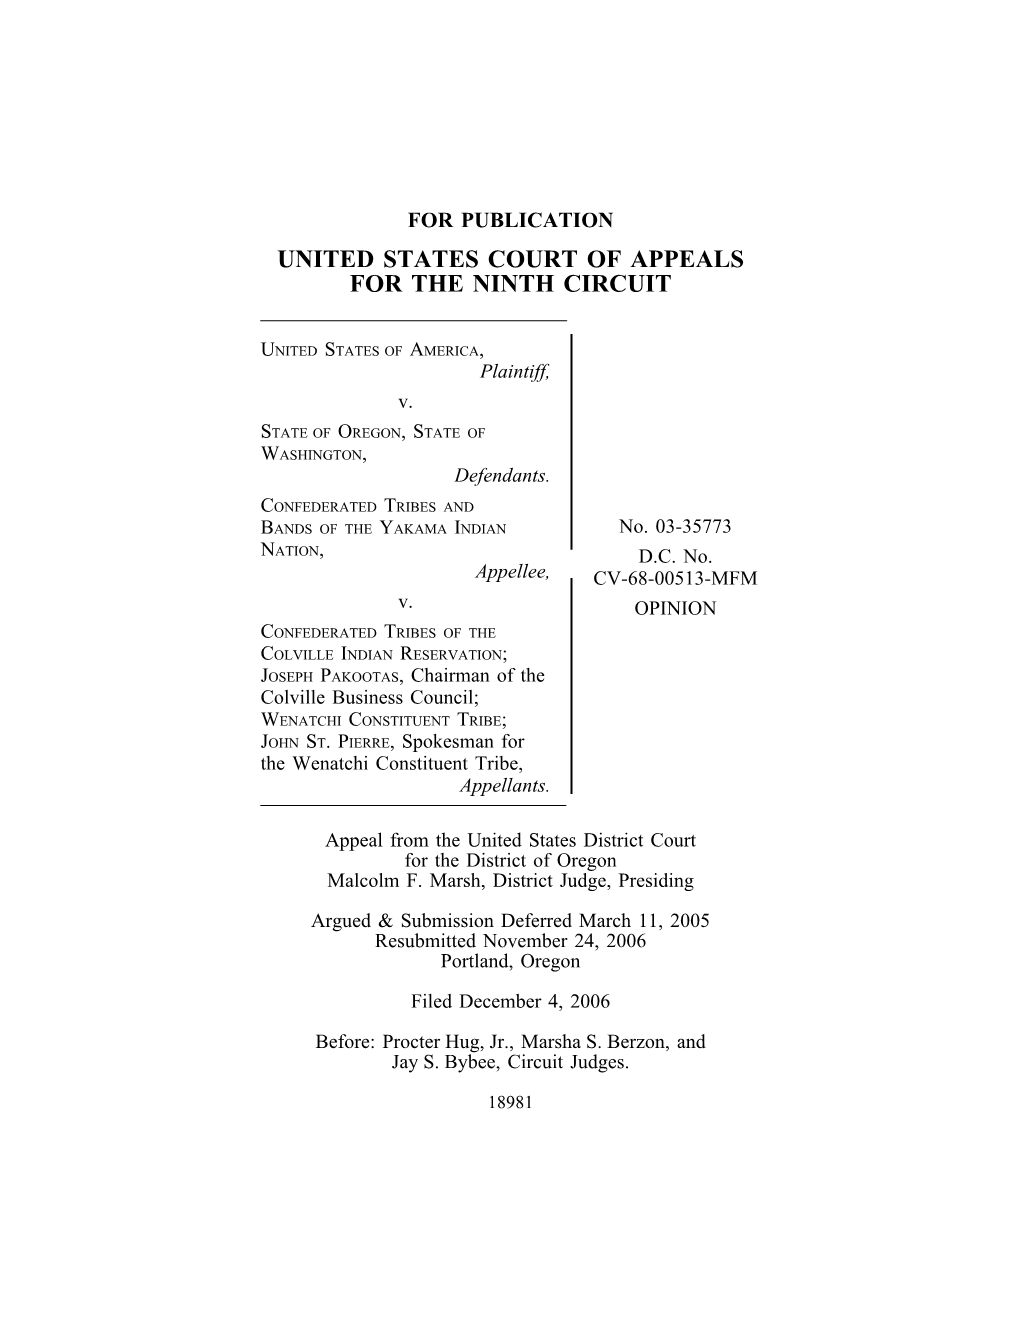 United States V. Confederated Tribes and Bands of Yakama Indian